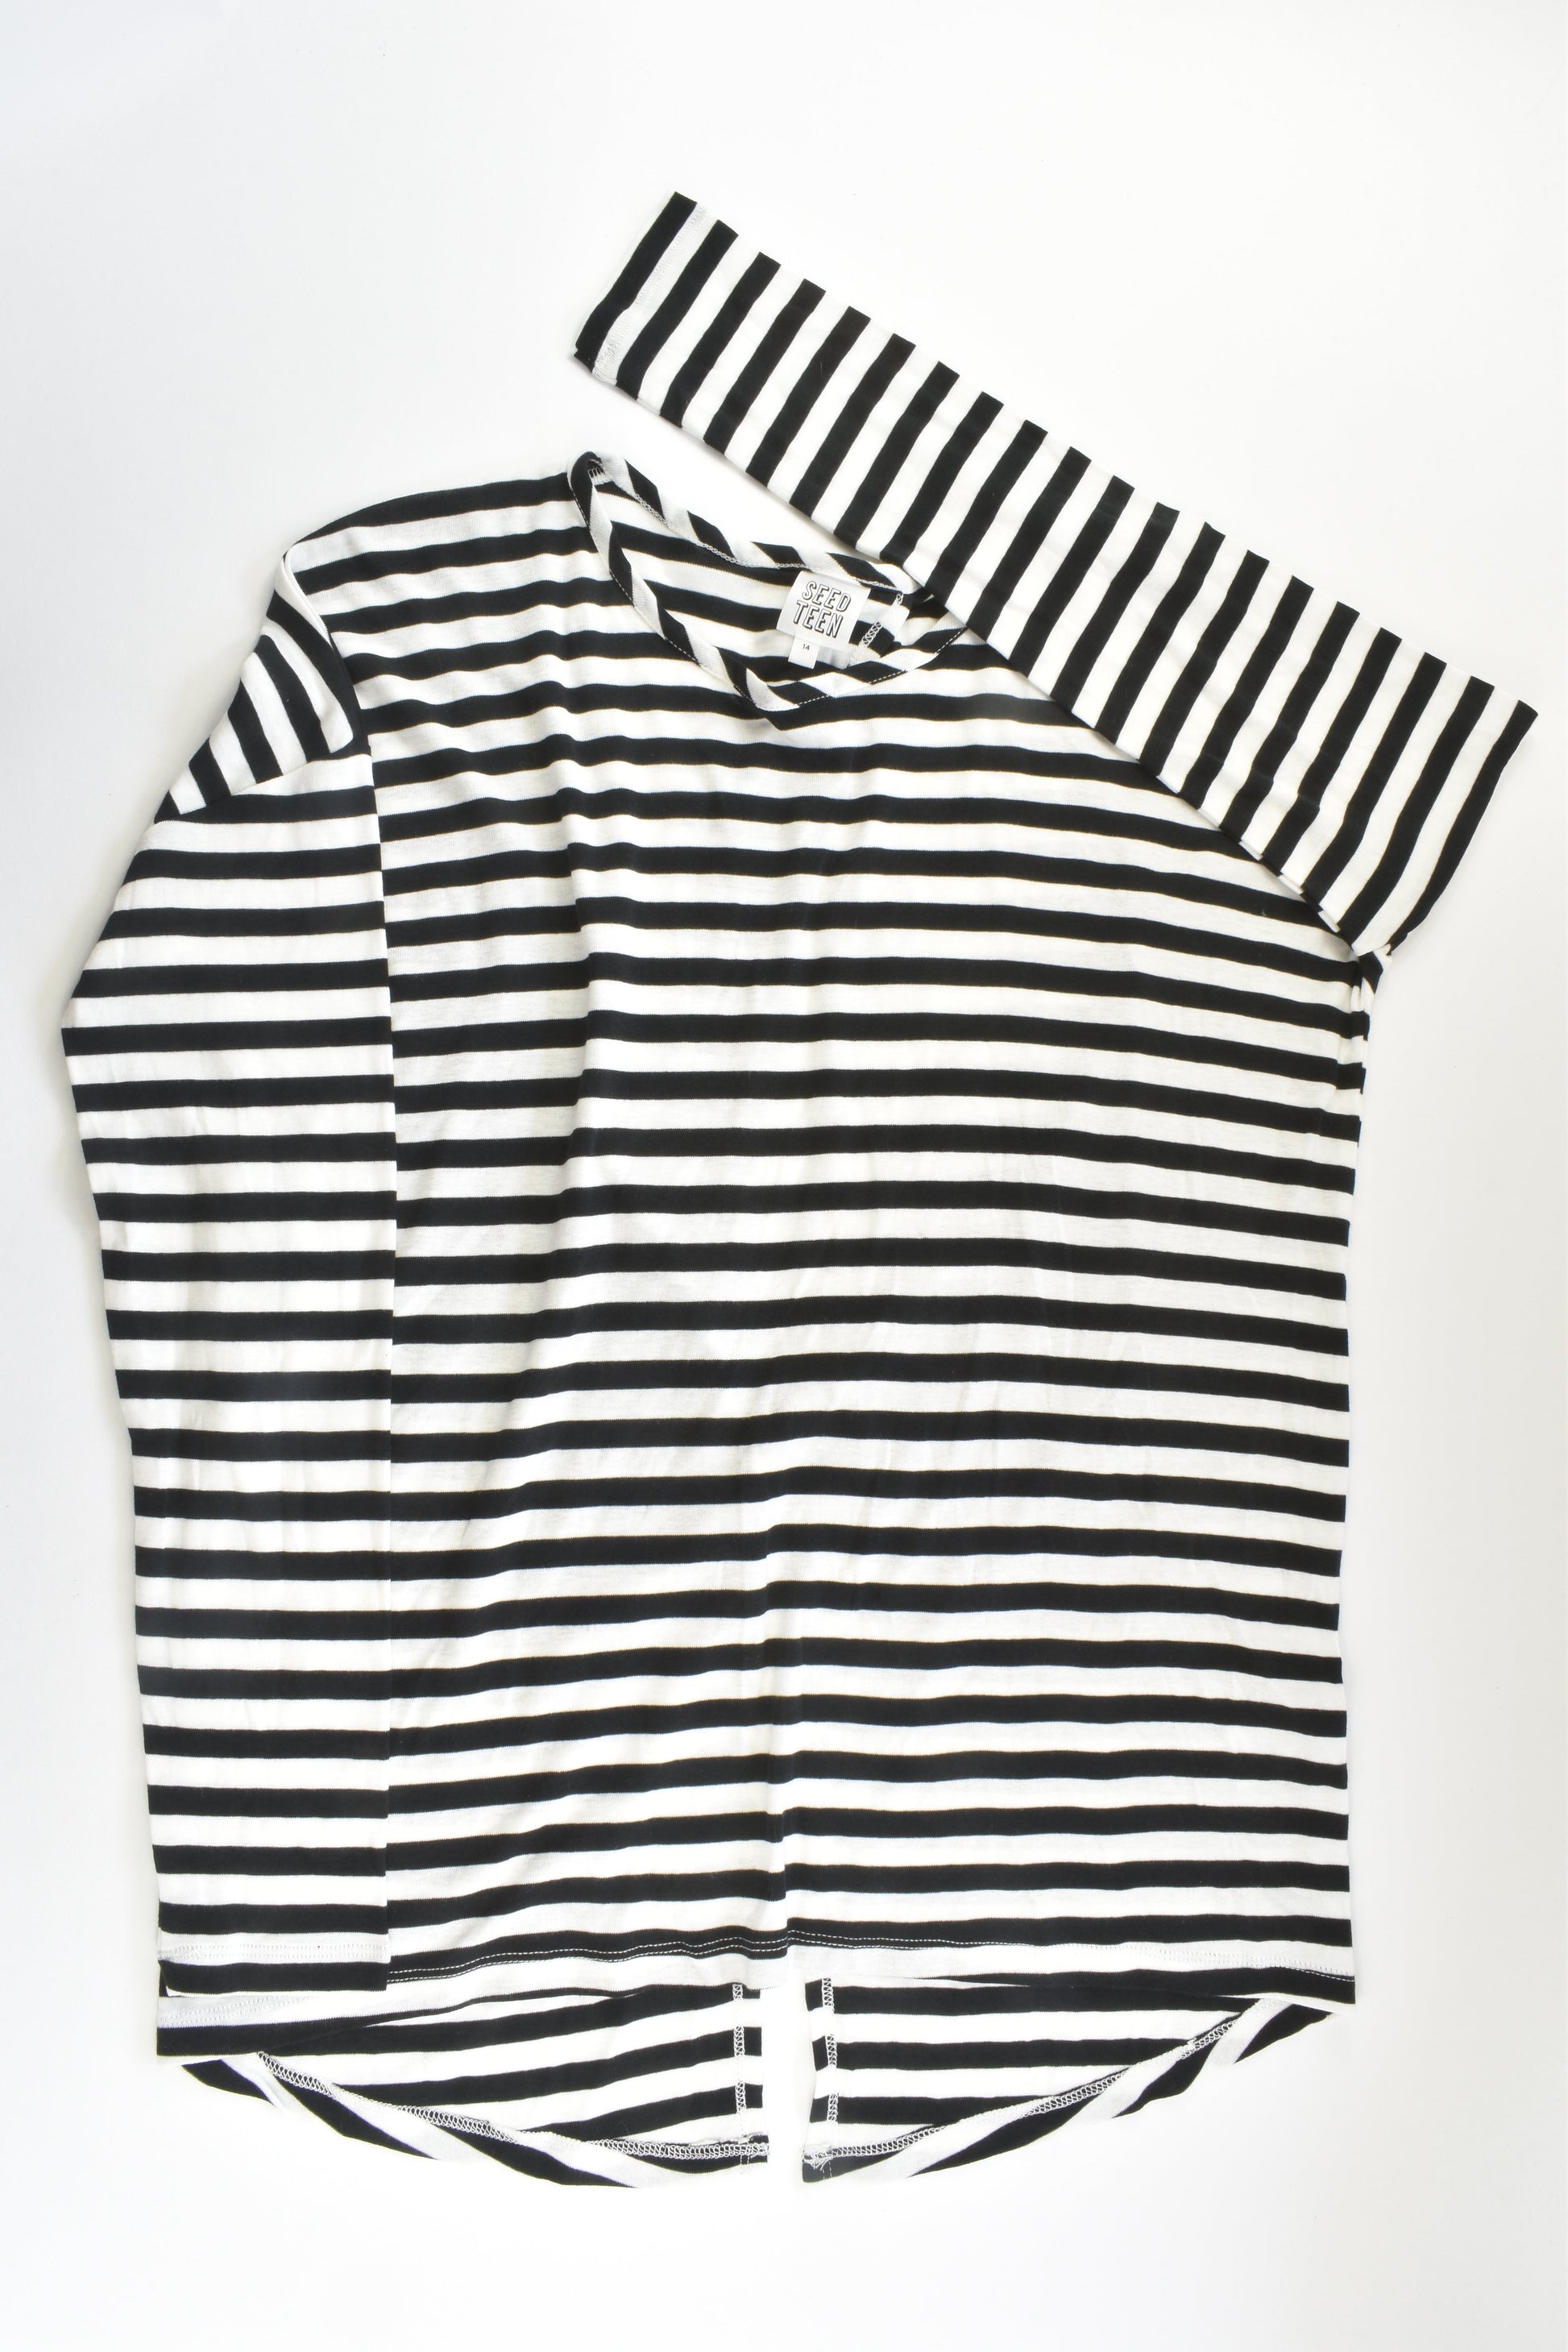 NEW Seed Heritage (Seed Teen) Size 14 Striped Top